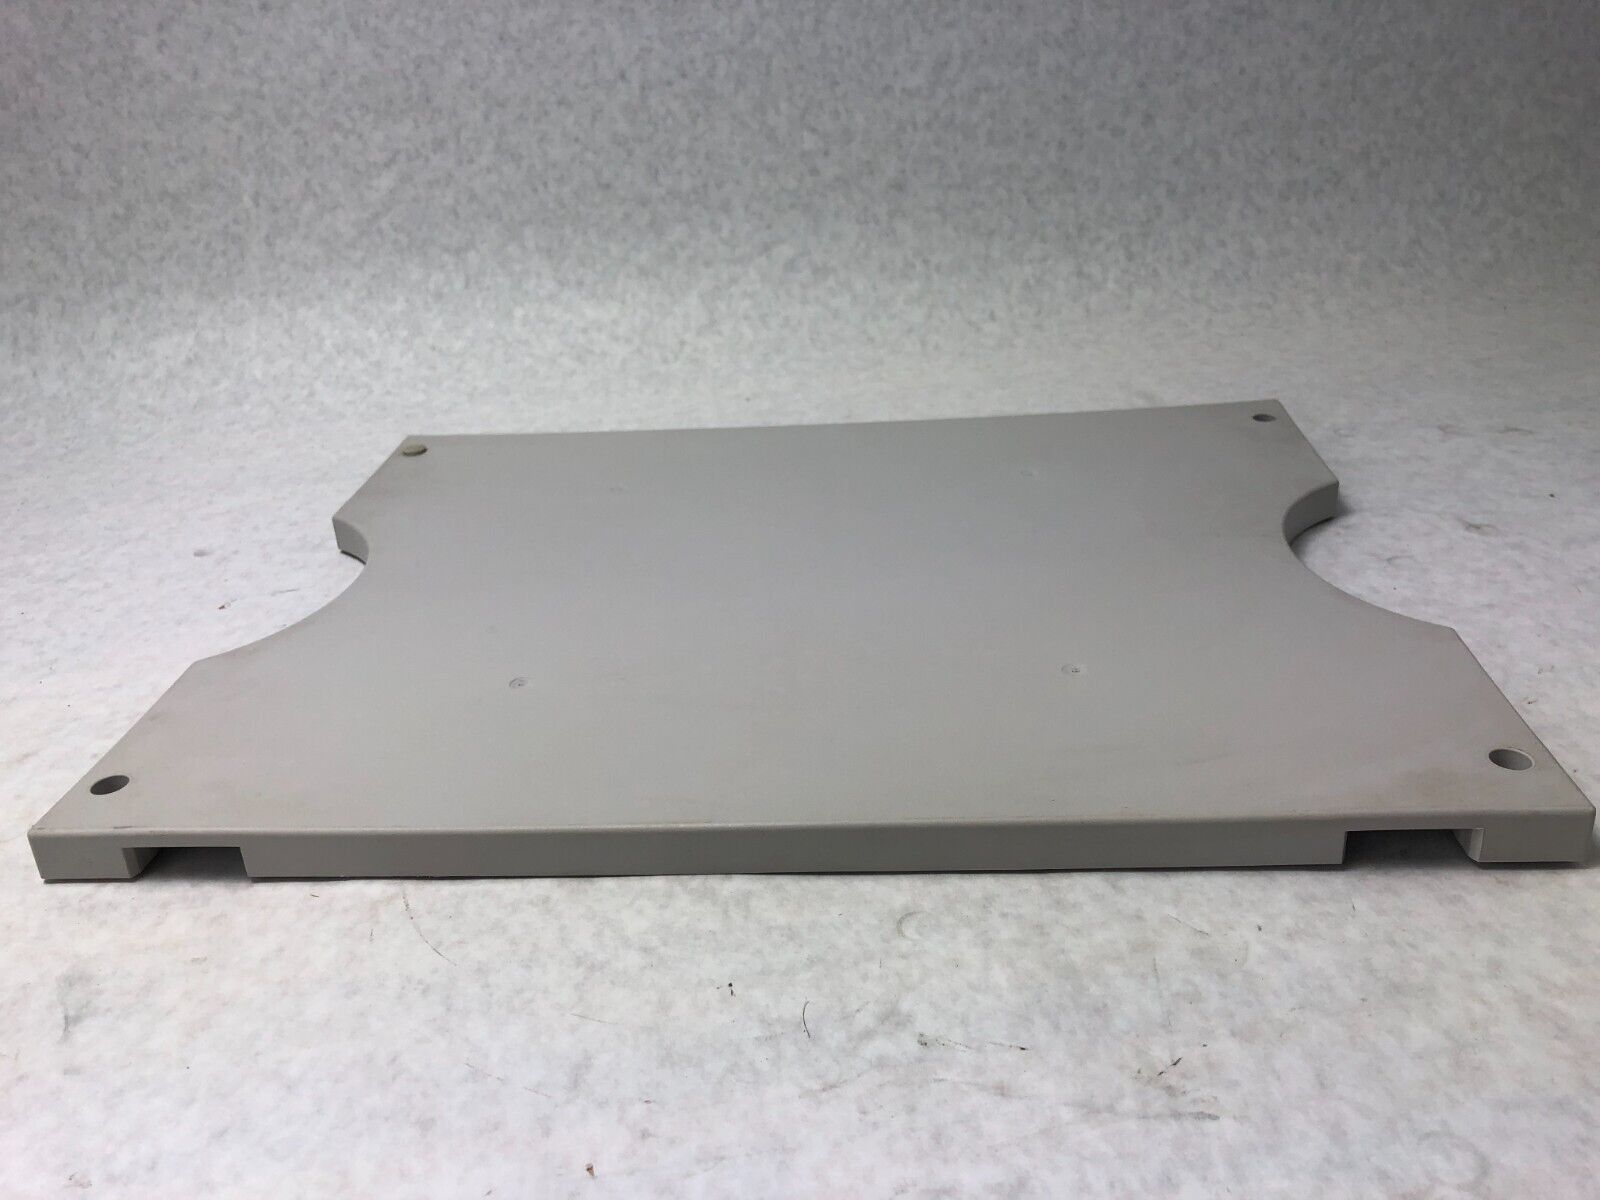 Agilent 1100 Series Degasser Solvent Tray Top Cover Lid Replacement 5042-6457